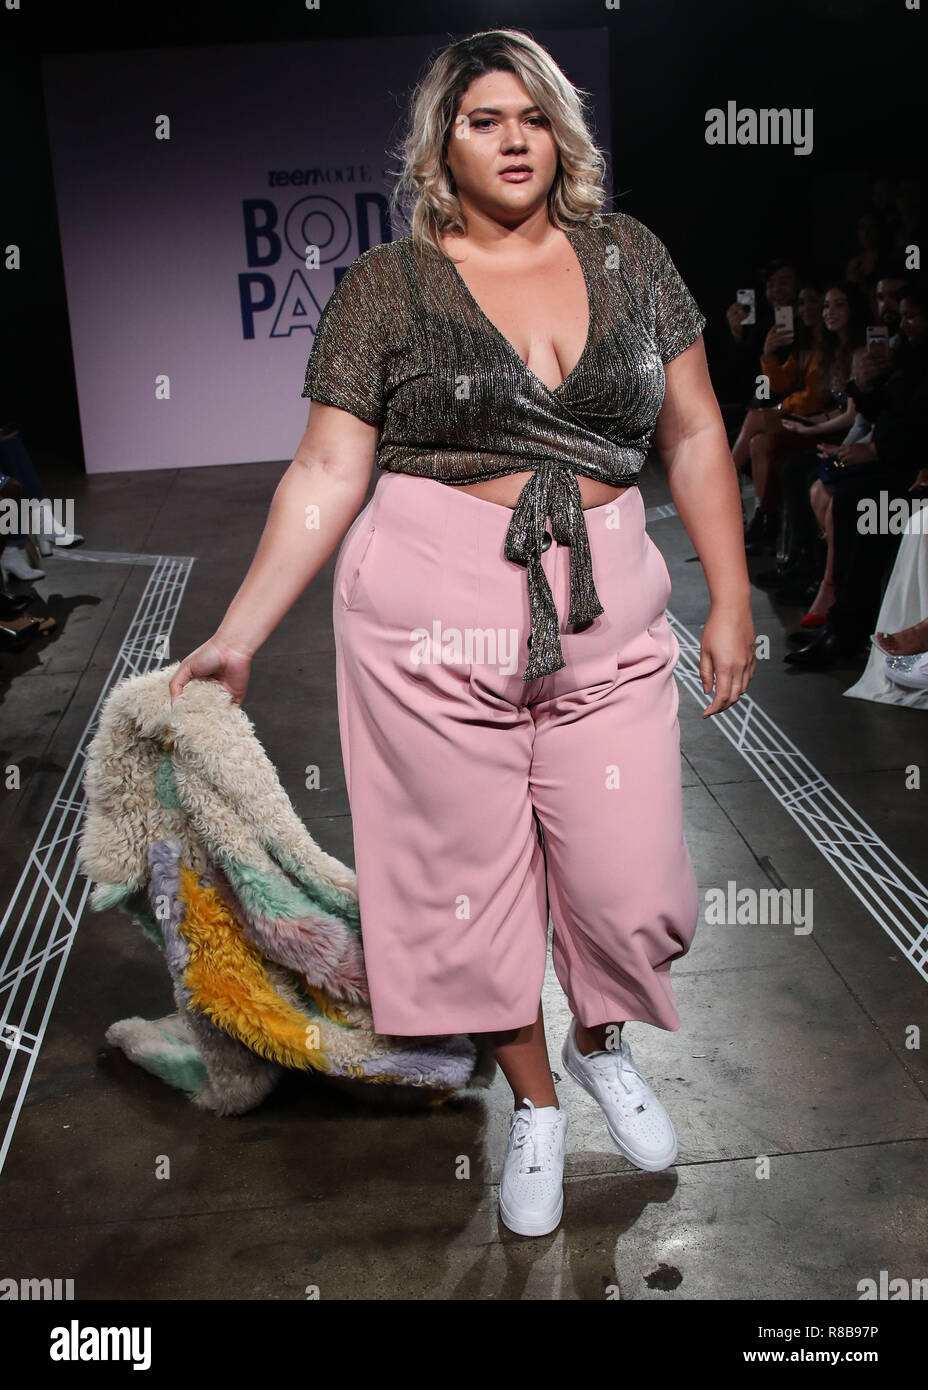 MANHATTAN, NEW YORK CITY, NY, USA - SEPTEMBER 11: Ana Batista at Teen Vogue's Body Party Presented By Snapchat held at The Garage on September 11, 2018 in Manhattan, New York City, New York, United States. (Photo by Xavier Collin/Image Press Agency) Stock Photo